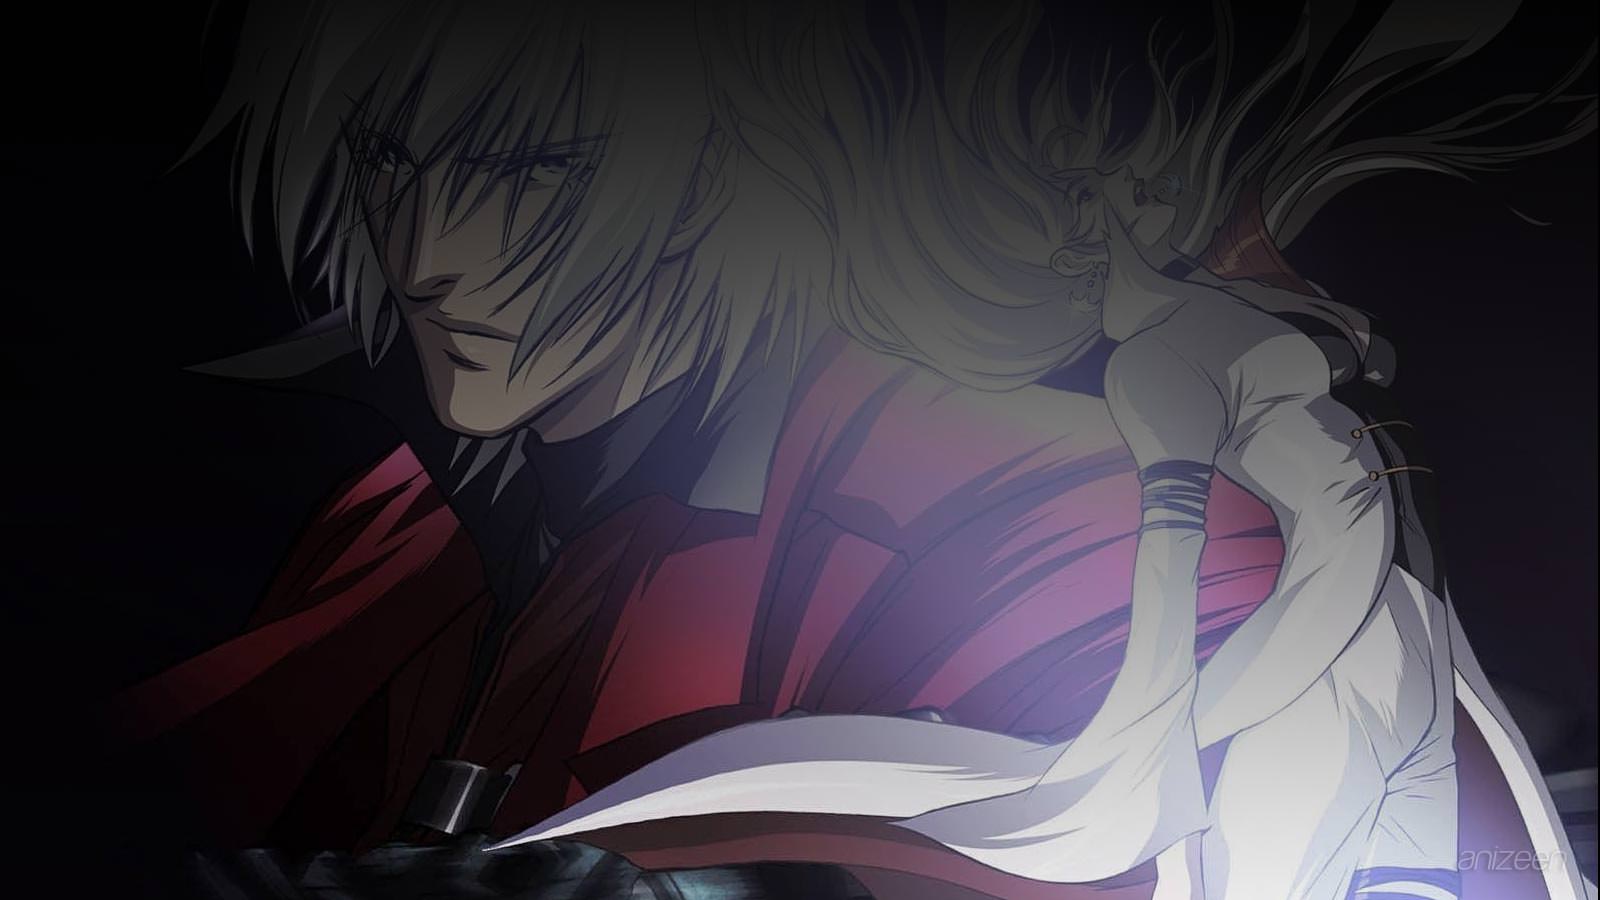 Devil May Cry anime